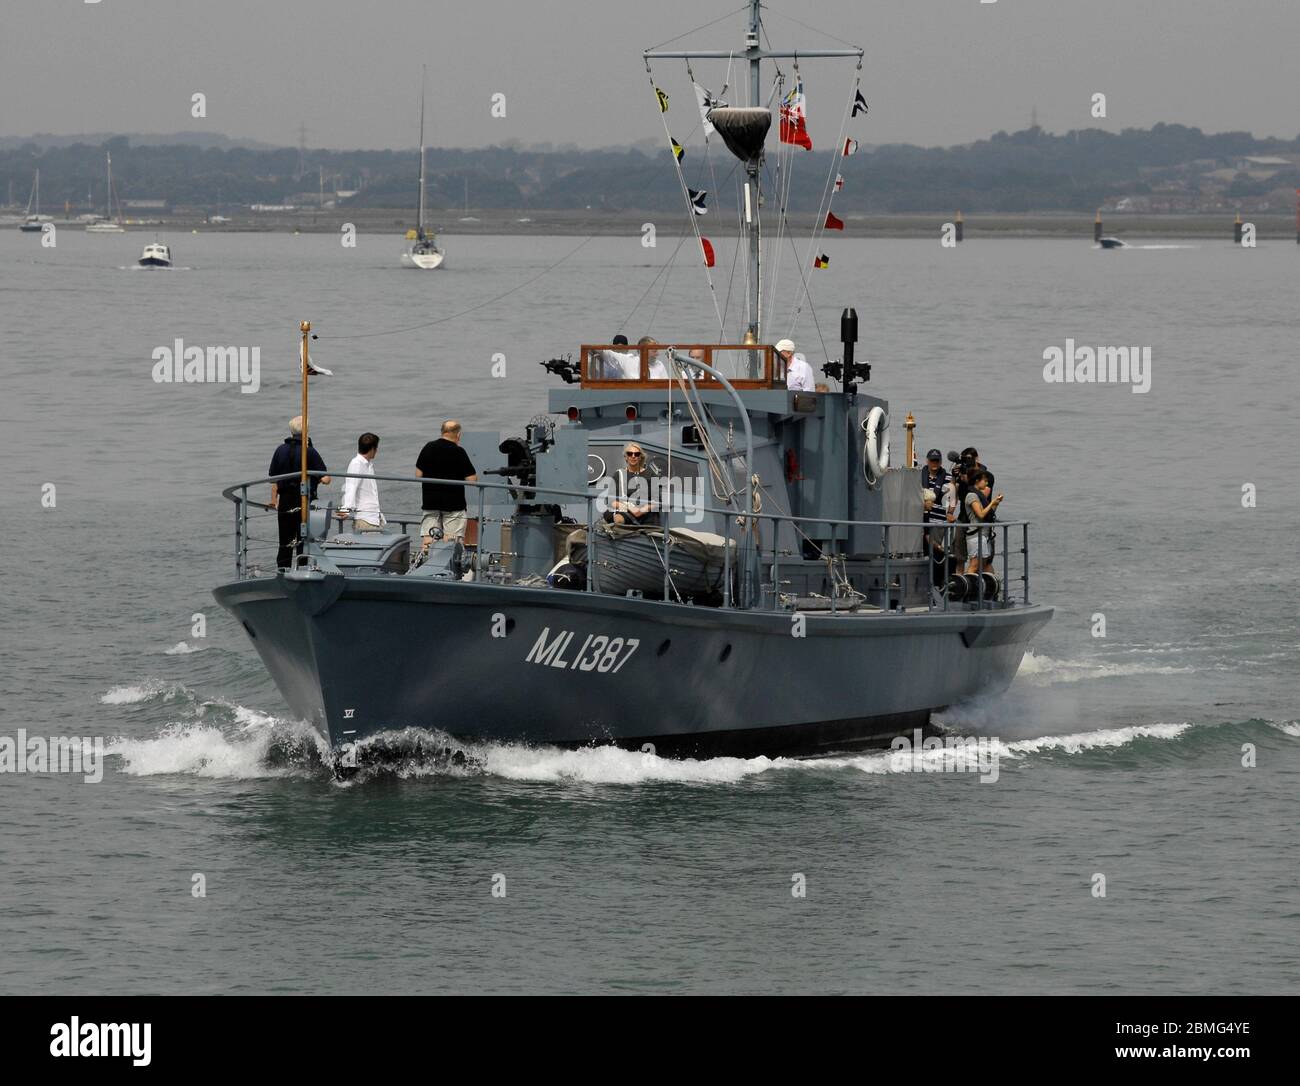 AJAXNETPHOTO. 25TH AUGUST, 2016. PORTSMOUTH, ENGLAND. - RESTORED WWII HARBOUR DEFENCE LAUNCH - RESTORED SECOND WORLD WAR HDML 1387 'MEDUSA' DURING THE SAIL-PAST MARKING THE 100TH ANNIVERSARY OF THE FOUNDING OF COASTAL FORCES. . PHOTO:JONATHAN EASTLAND/AJAX REF: D162508 6064 Stock Photo